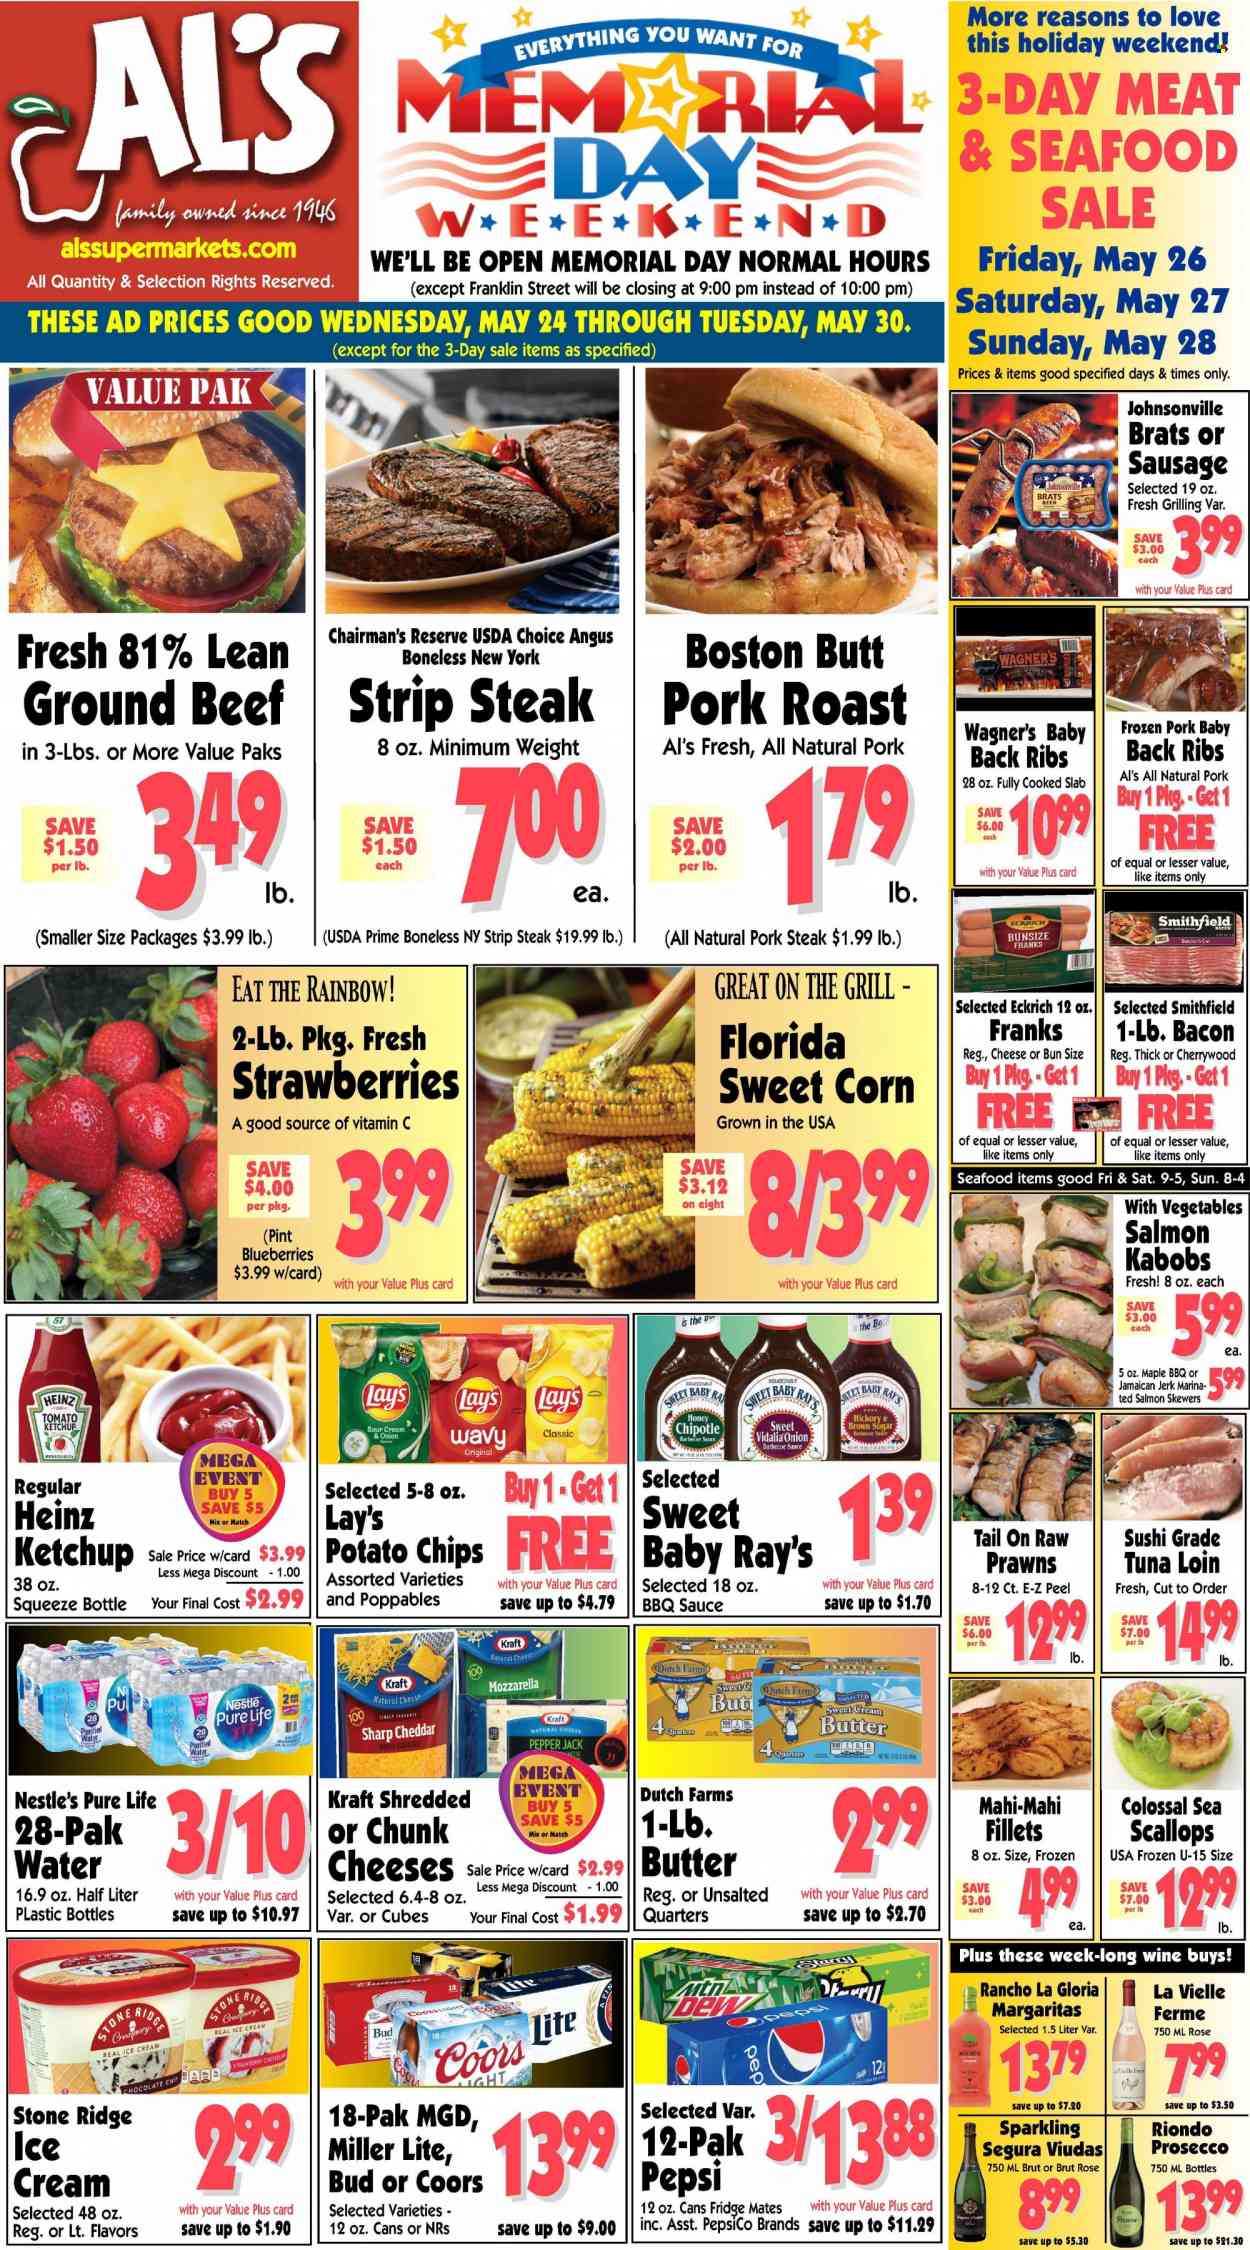 thumbnail - Al's Supermarket Flyer - 05/24/2023 - 05/30/2023 - Sales products - corn, sweet corn, blueberries, mahi mahi, scallops, tuna, seafood, prawns, sushi, sauce, Kraft®, boston butt, roast, bacon, Johnsonville, frankfurters, mozzarella, Pepper Jack cheese, ice cream, Nestlé, chocolate chips, potato chips, Lay’s, cane sugar, Heinz, BBQ sauce, ketchup, honey, Pepsi, soft drink, purified water, water, sparkling wine, prosecco, alcohol, beer, beef meat, ground beef, steak, striploin steak, ribs, pork chops, pork meat, pork ribs, pork roast, pork back ribs, Brut, grill, Miller Lite, Coors. Page 1.